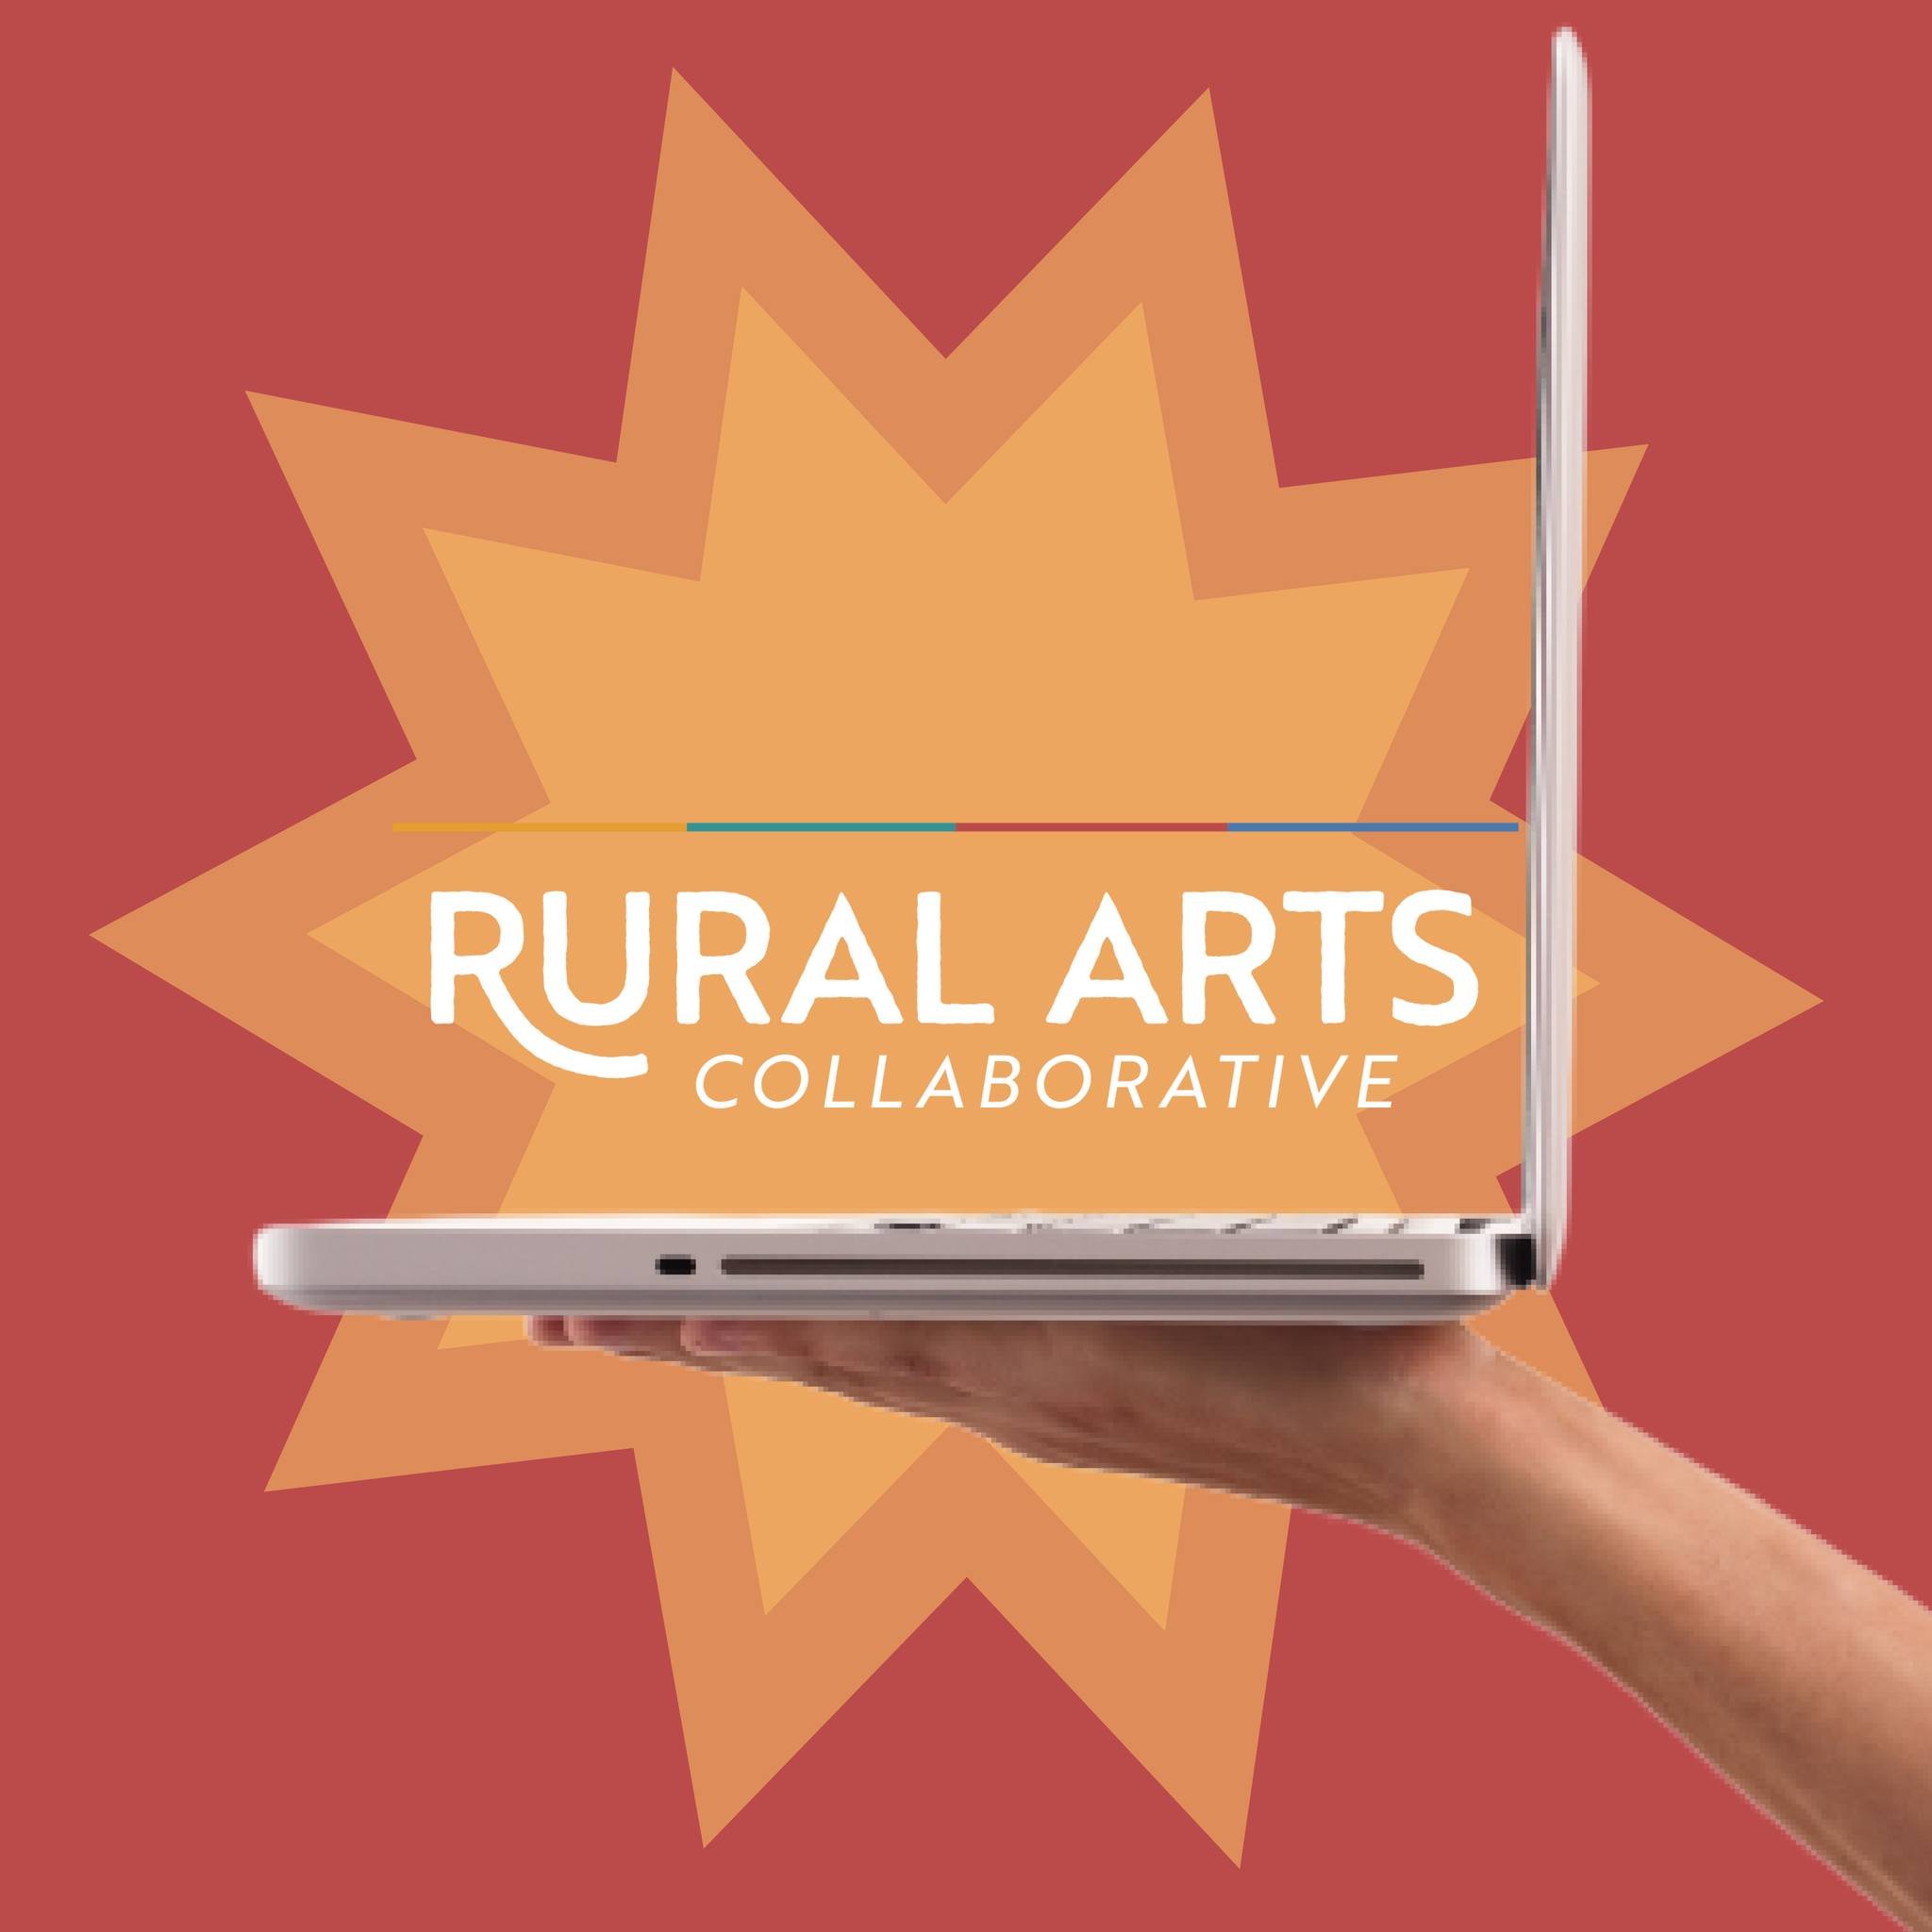 Have you seen our updated website? It&rsquo;s had a makeover! Visit RuralArtsVT.org to learn about our organization, programs, services, mission, and more.

We&rsquo;d love your feedback. Do you love it? Is there something on the site that still need